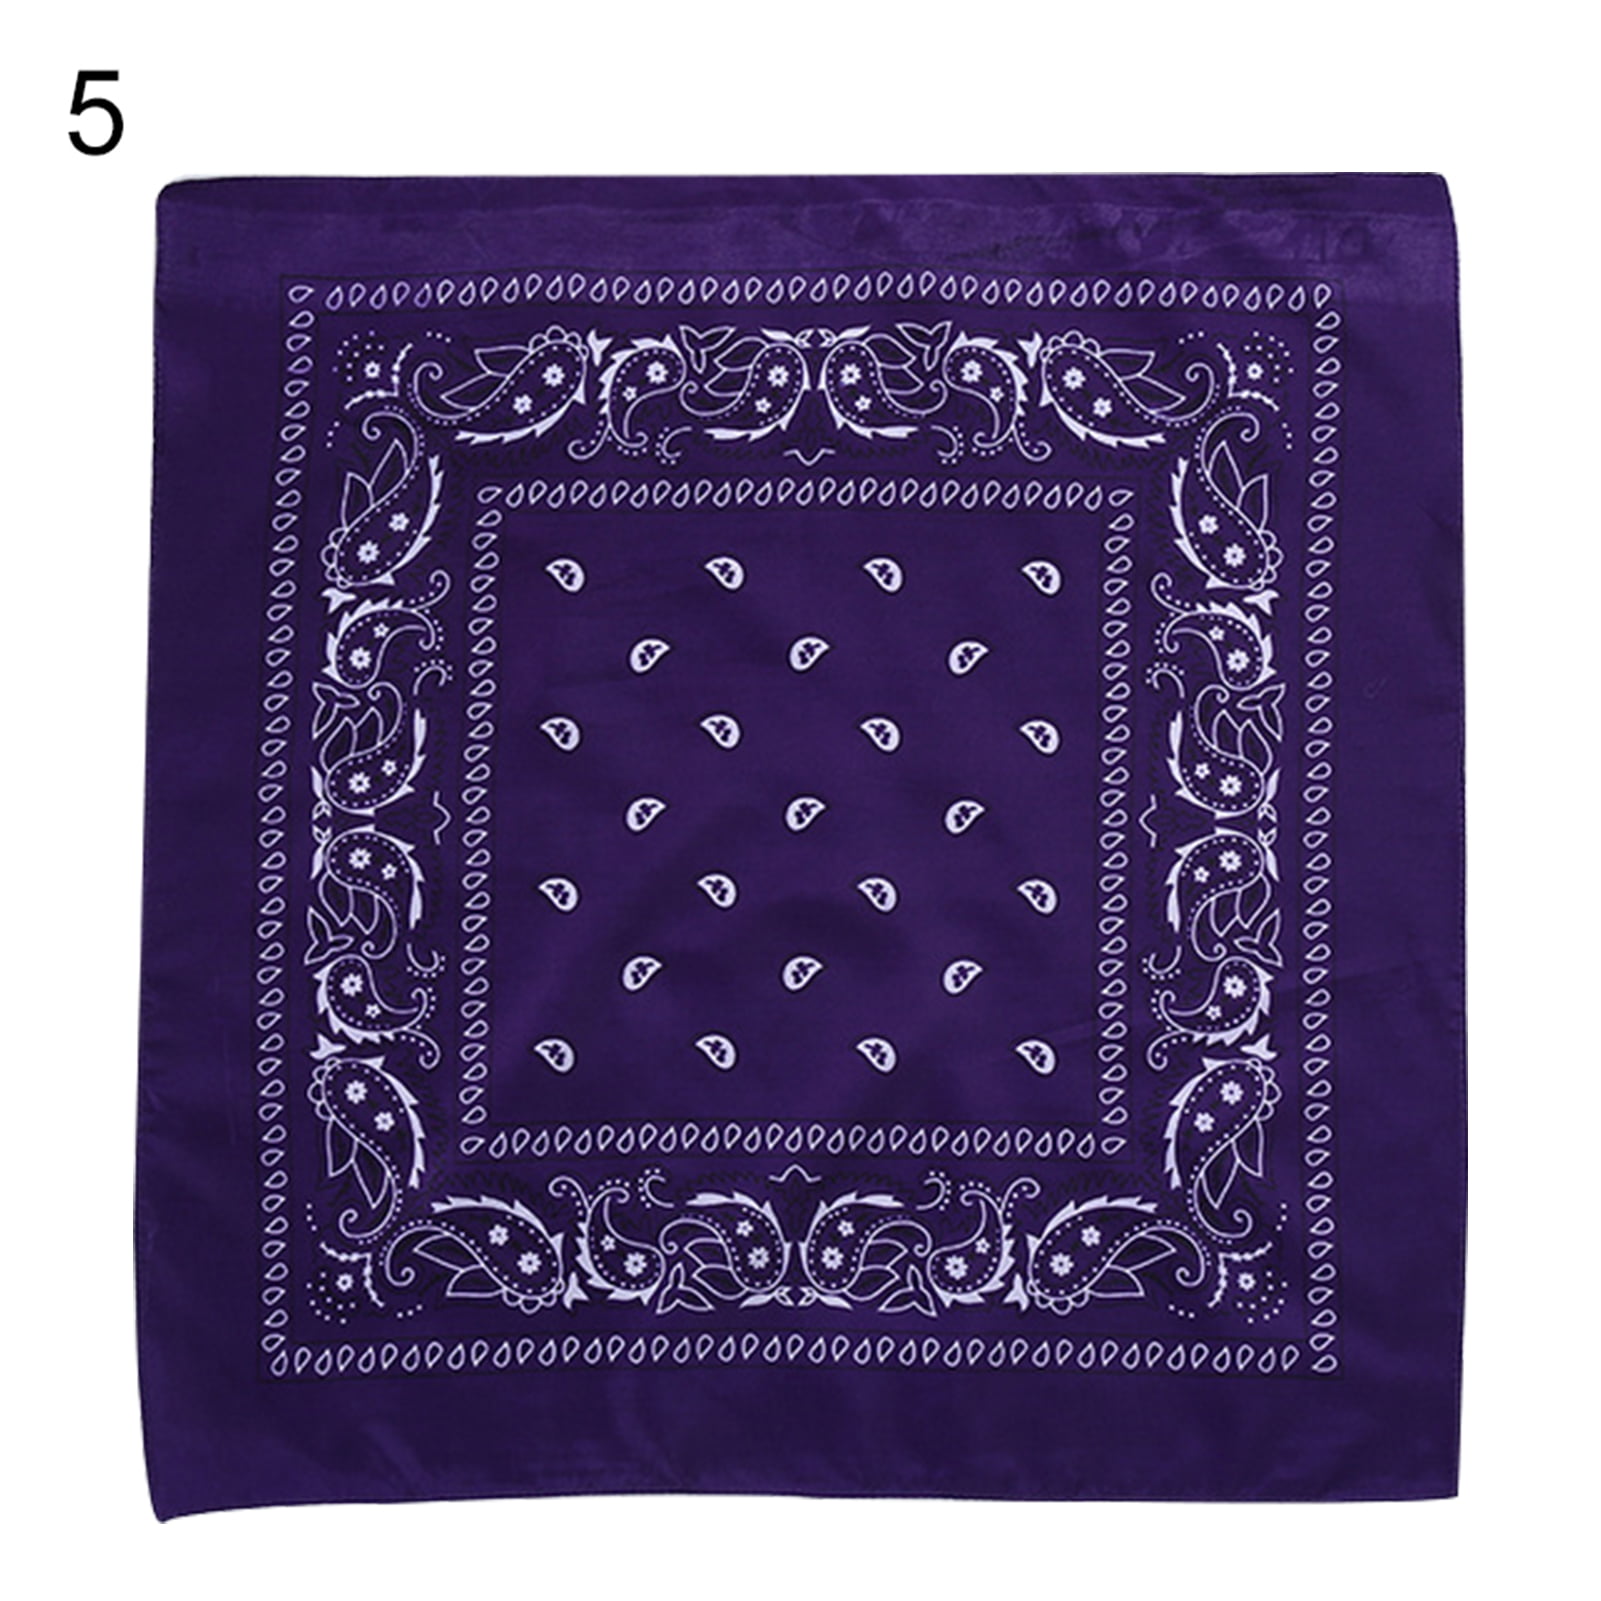 & and Bandana Bandana Square Paisley Cotton Scarf Suitable 100% Manunclaims for Cycling Cowboy for Headbands Women Handkerchief Hip-Hop Men, Ideal Face For Scarf Dogs Balaclavas, DIY